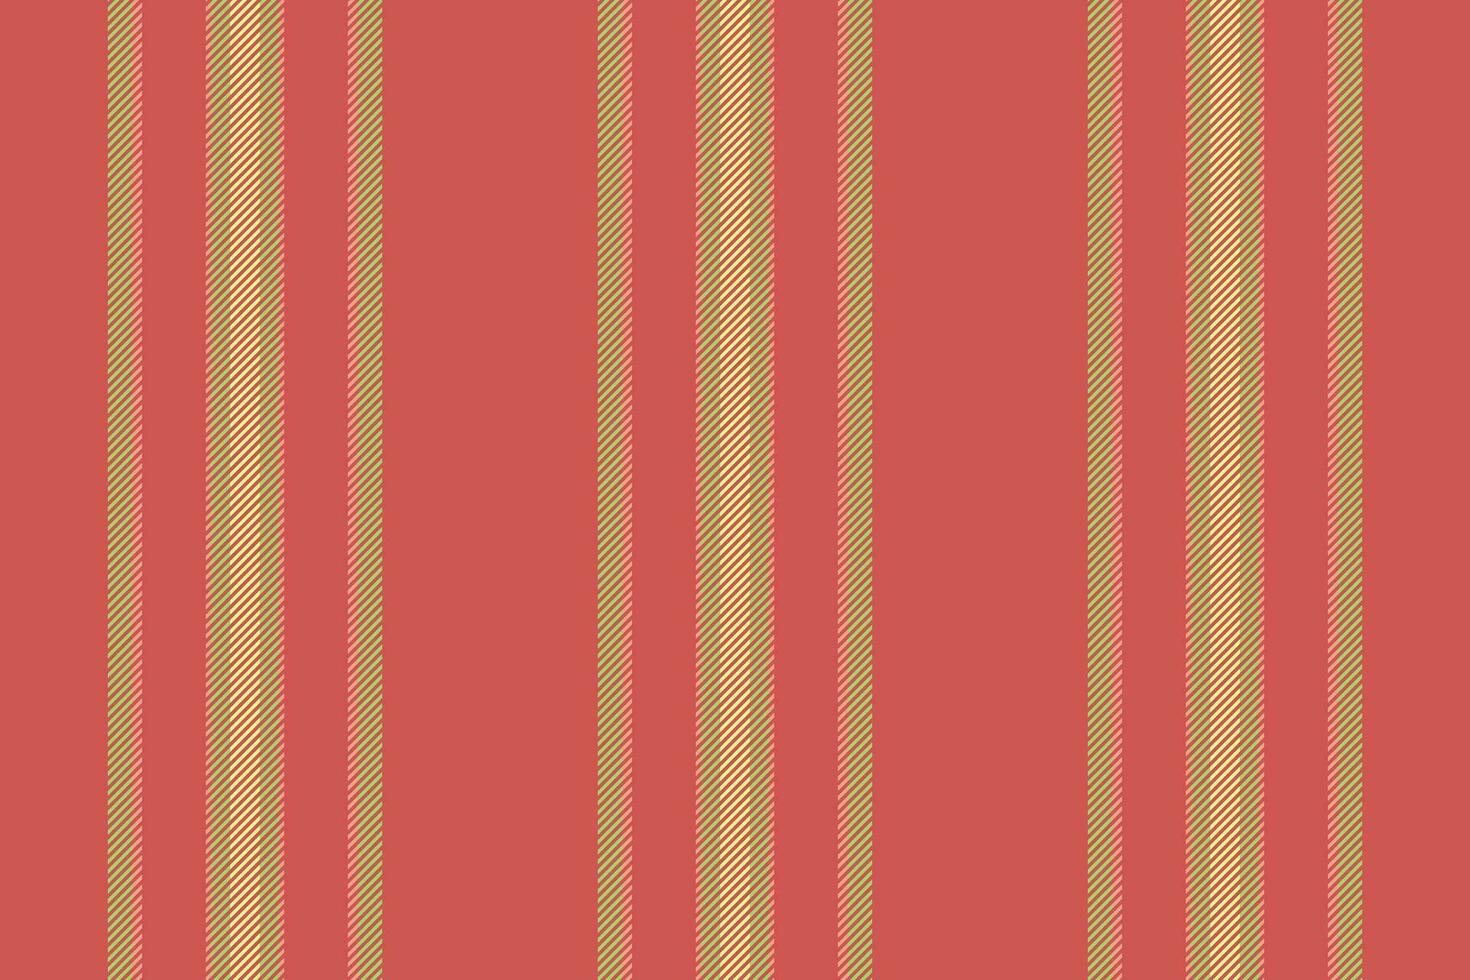 Postcard texture background seamless, swatch vector vertical lines. Anniversary pattern fabric textile stripe in red and green colors.